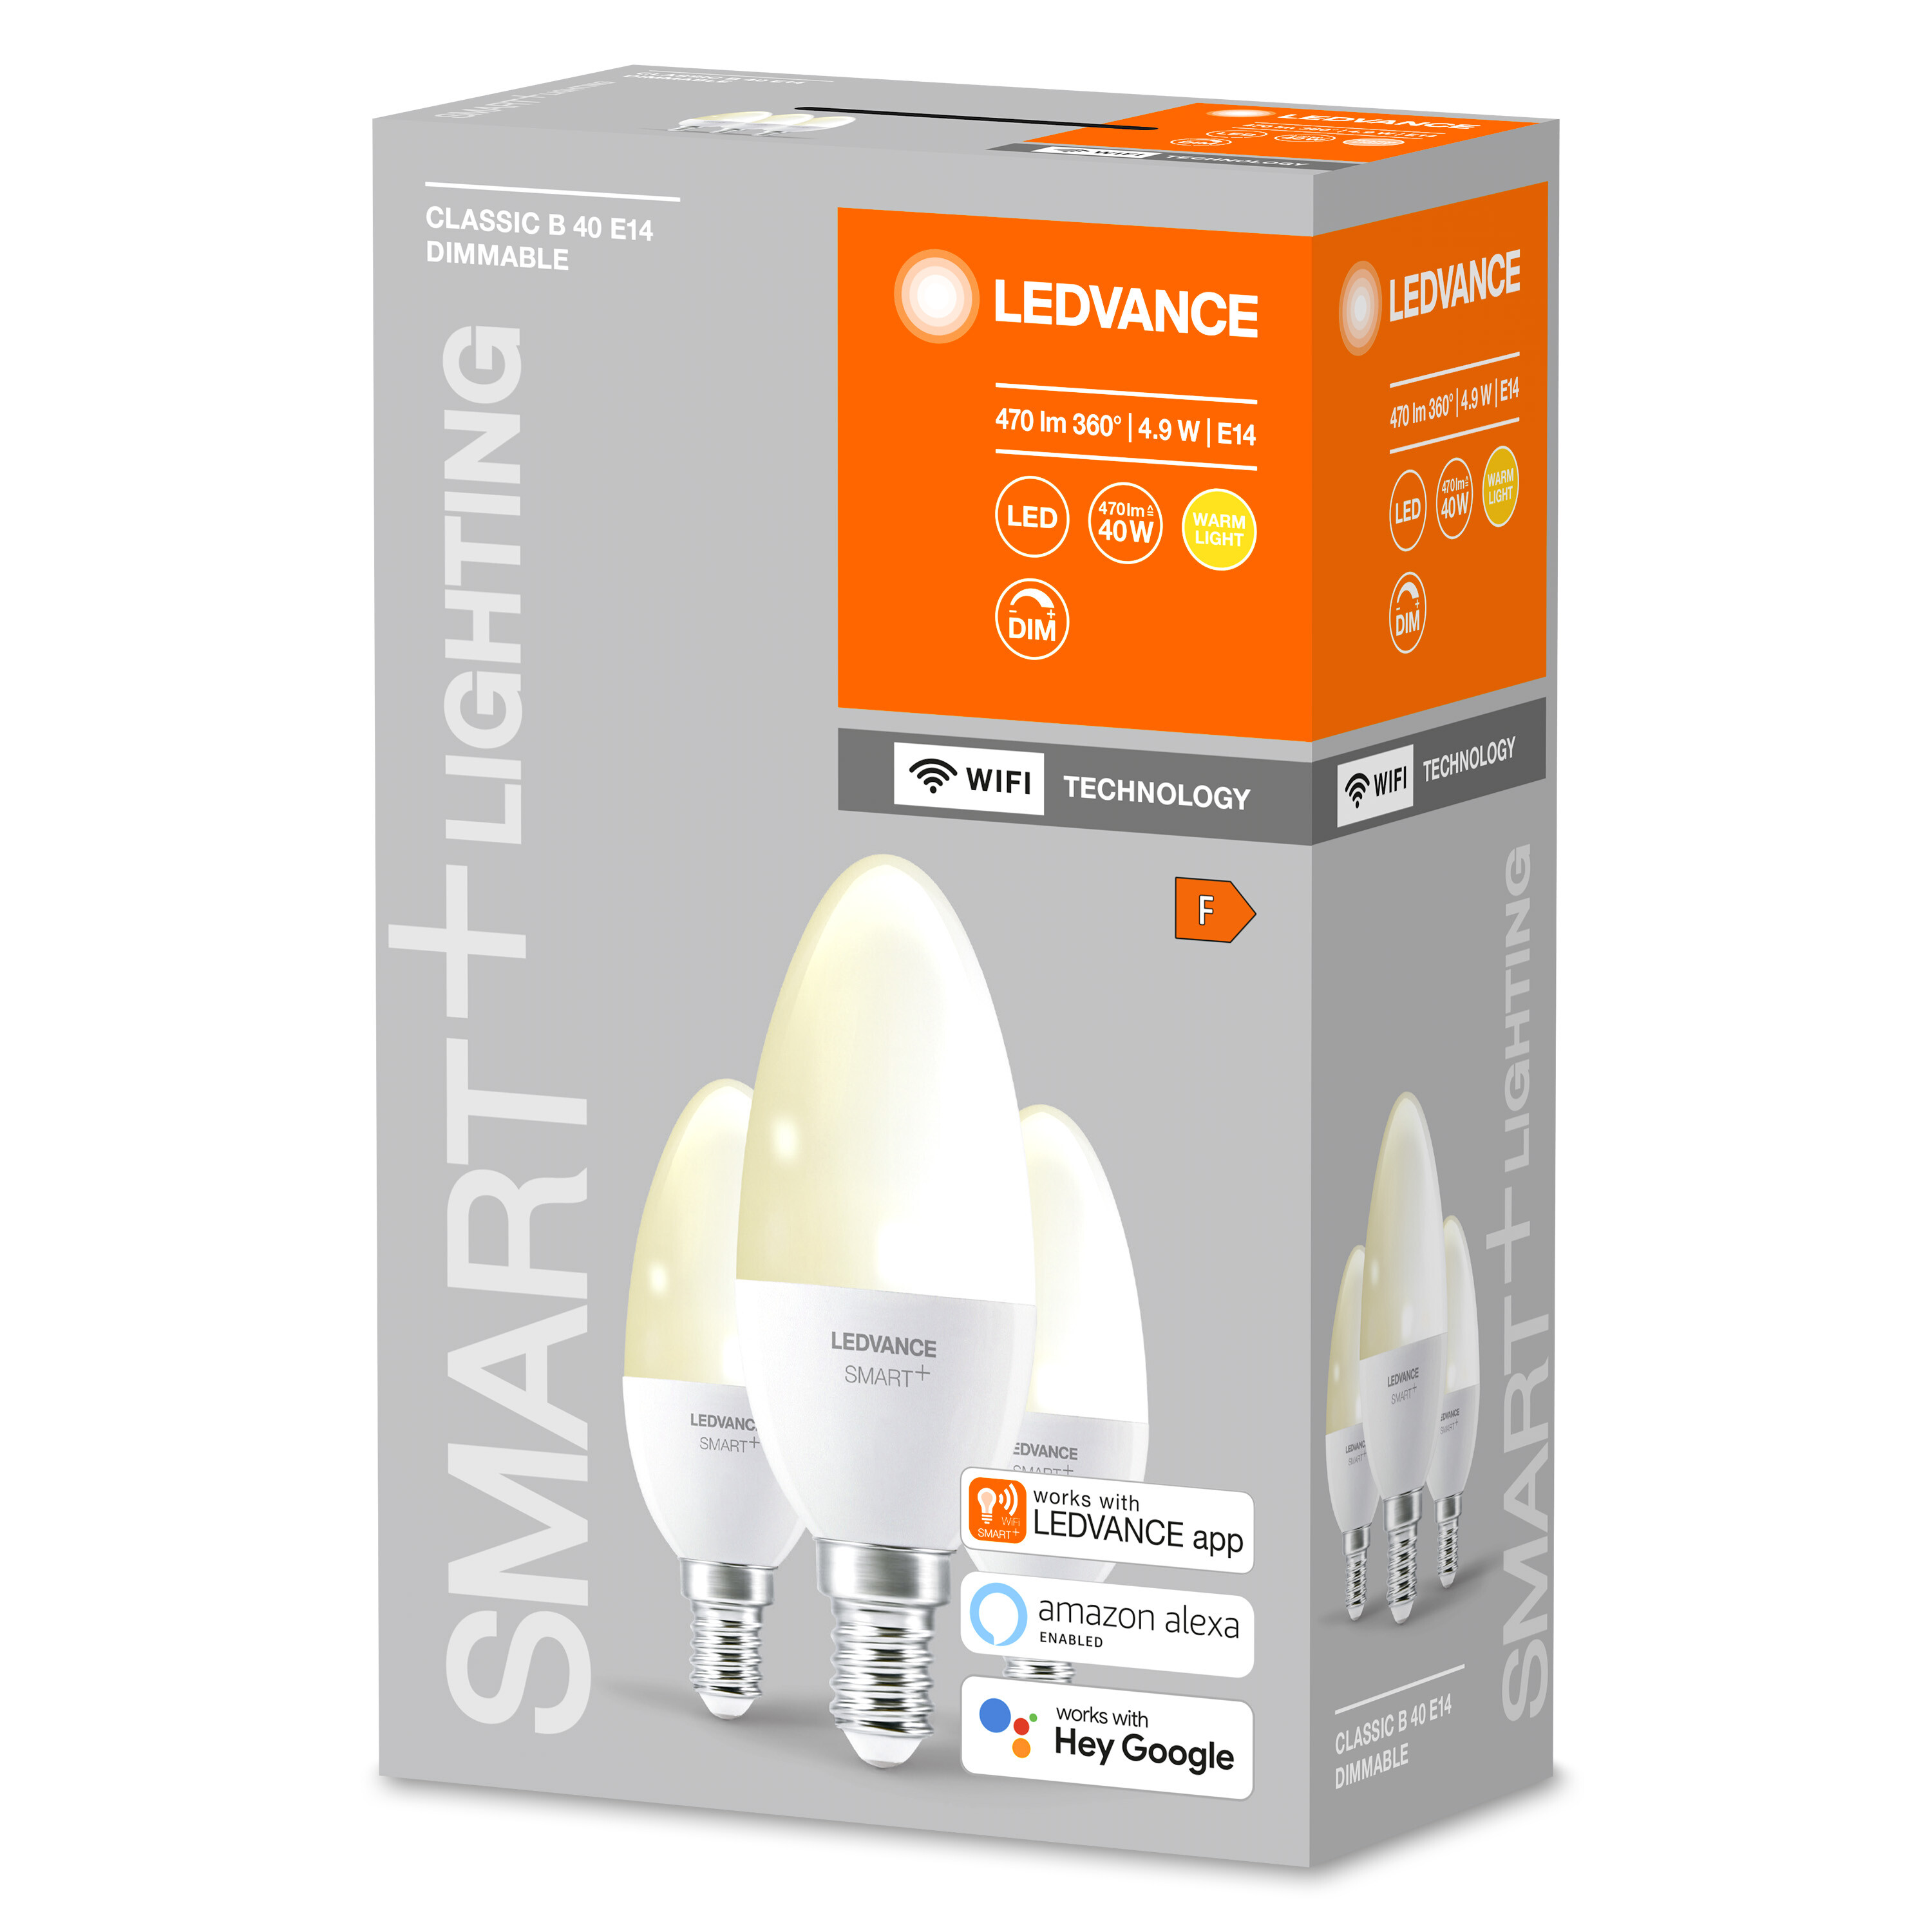 LEDVANCE LED Warmweiß WiFi Candle Lampe SMART+ Dimmable